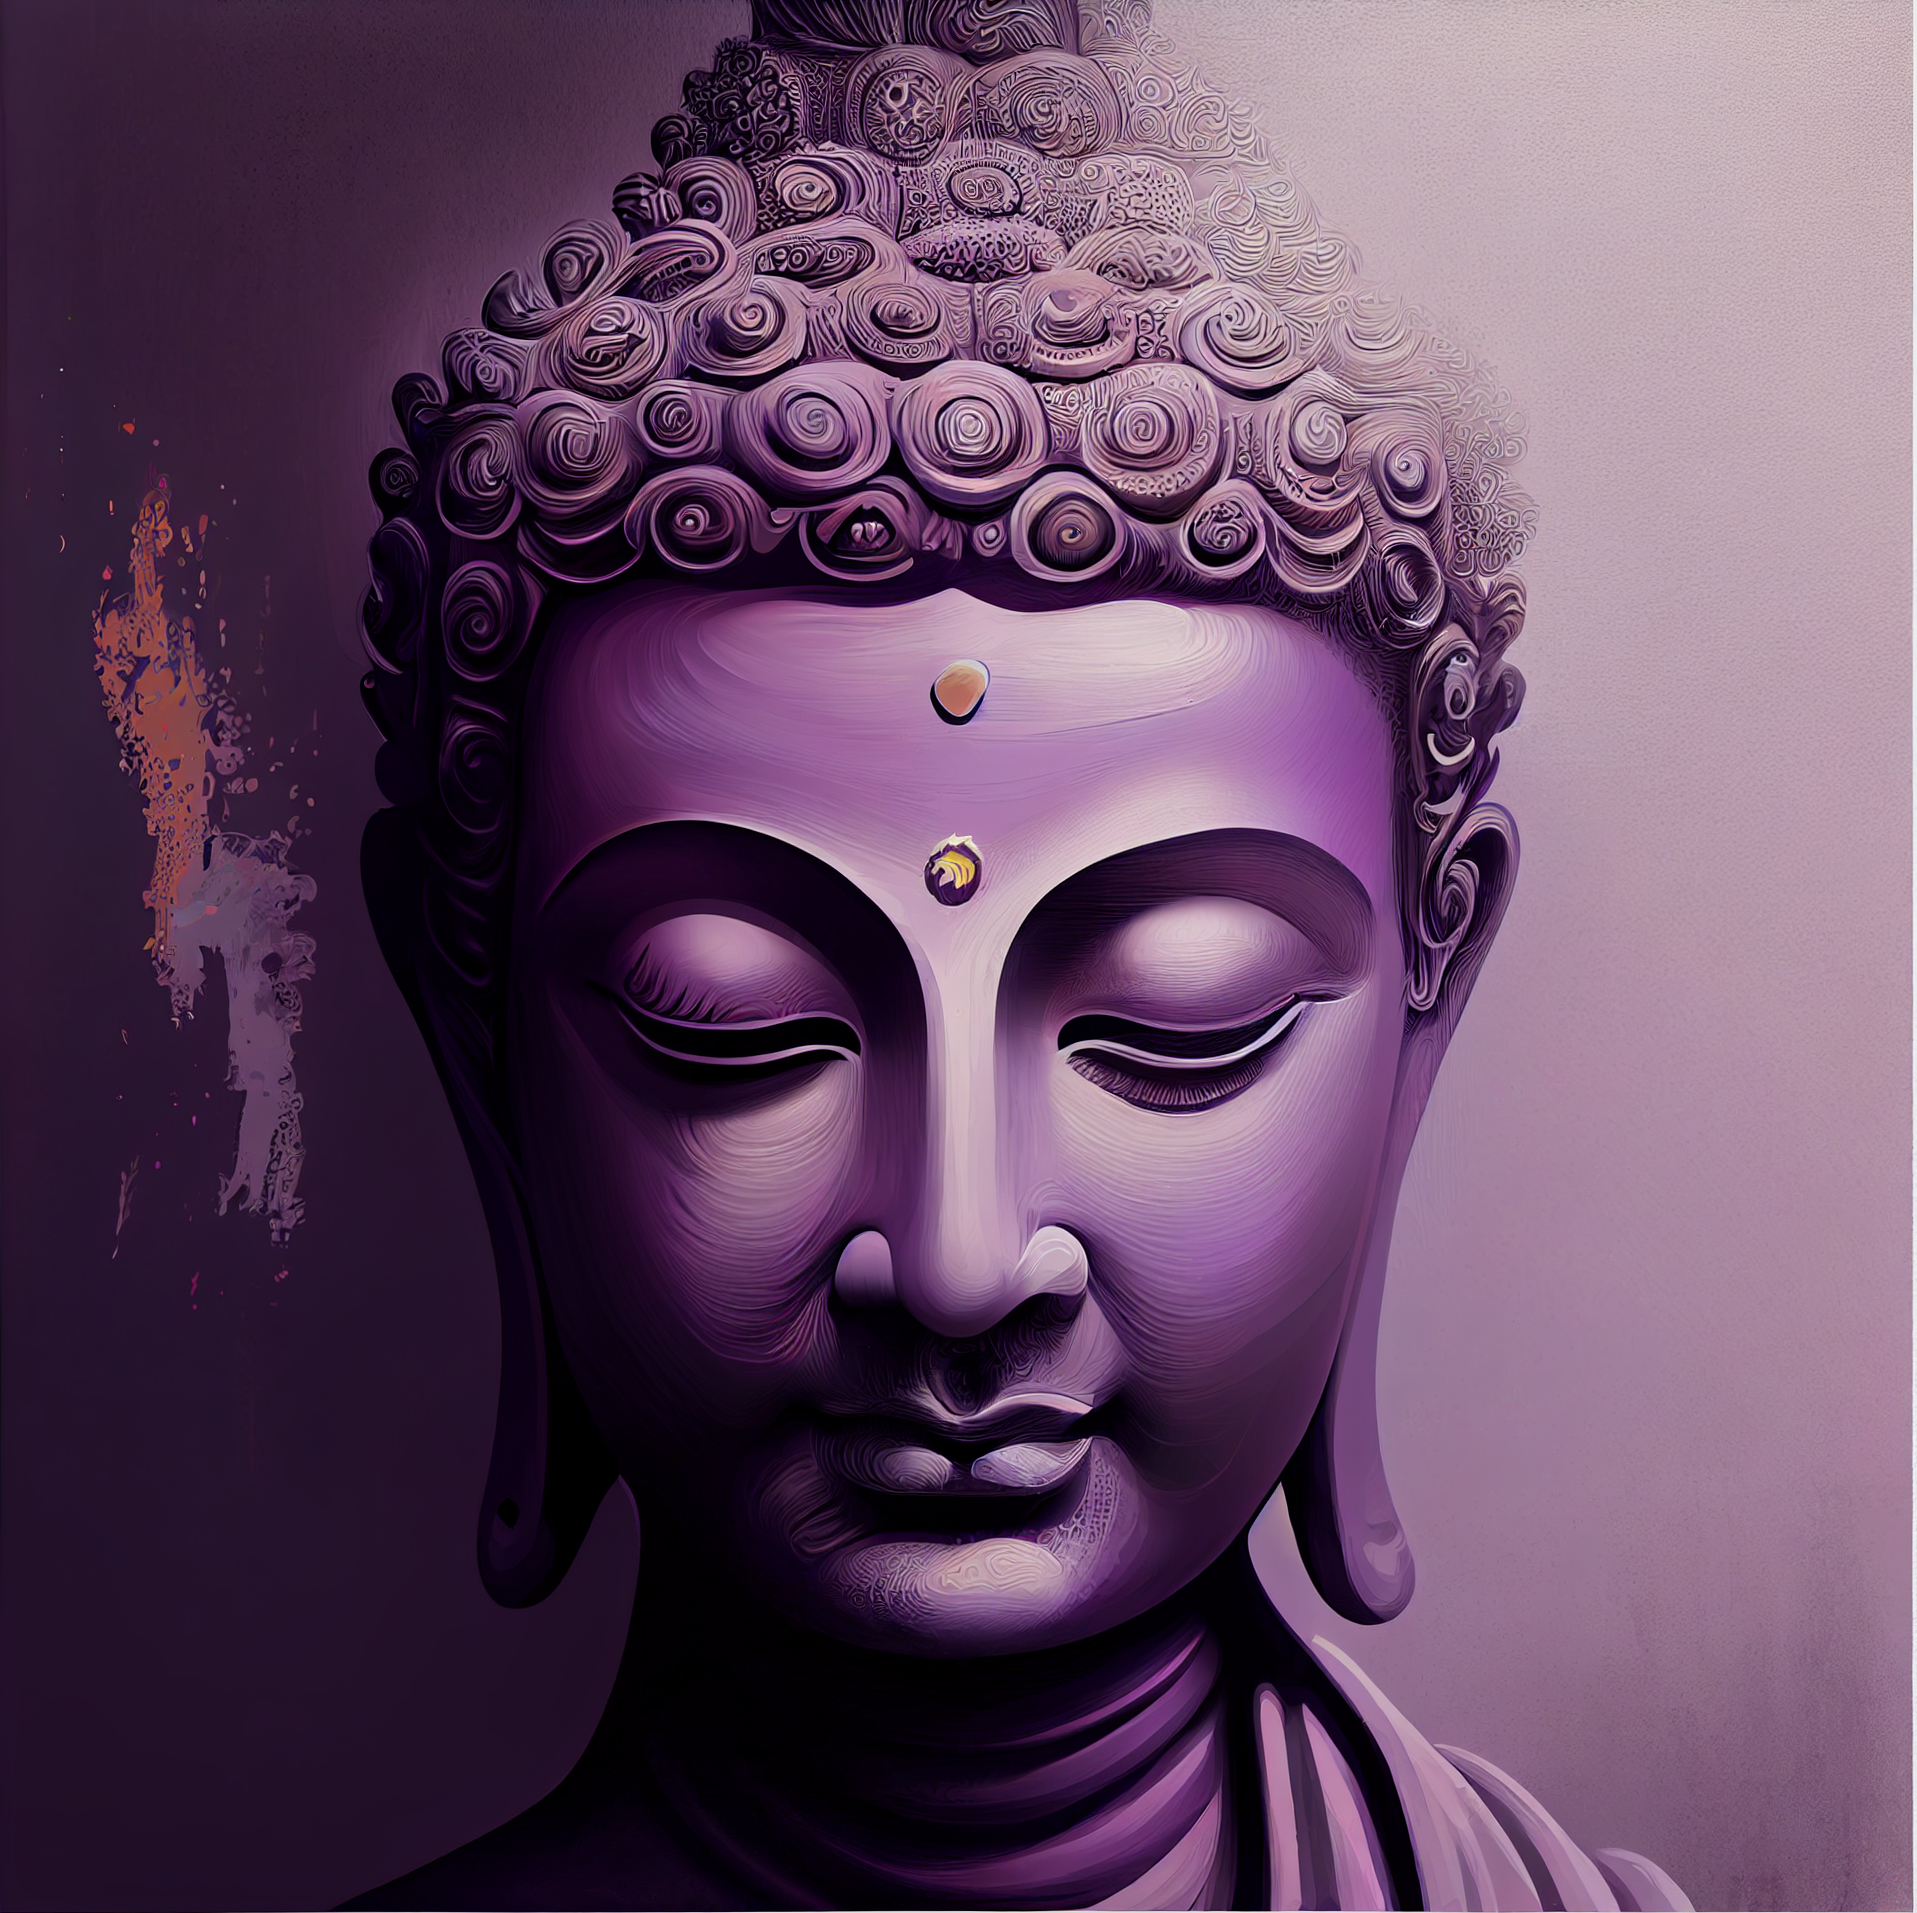 lord buddha face paintings